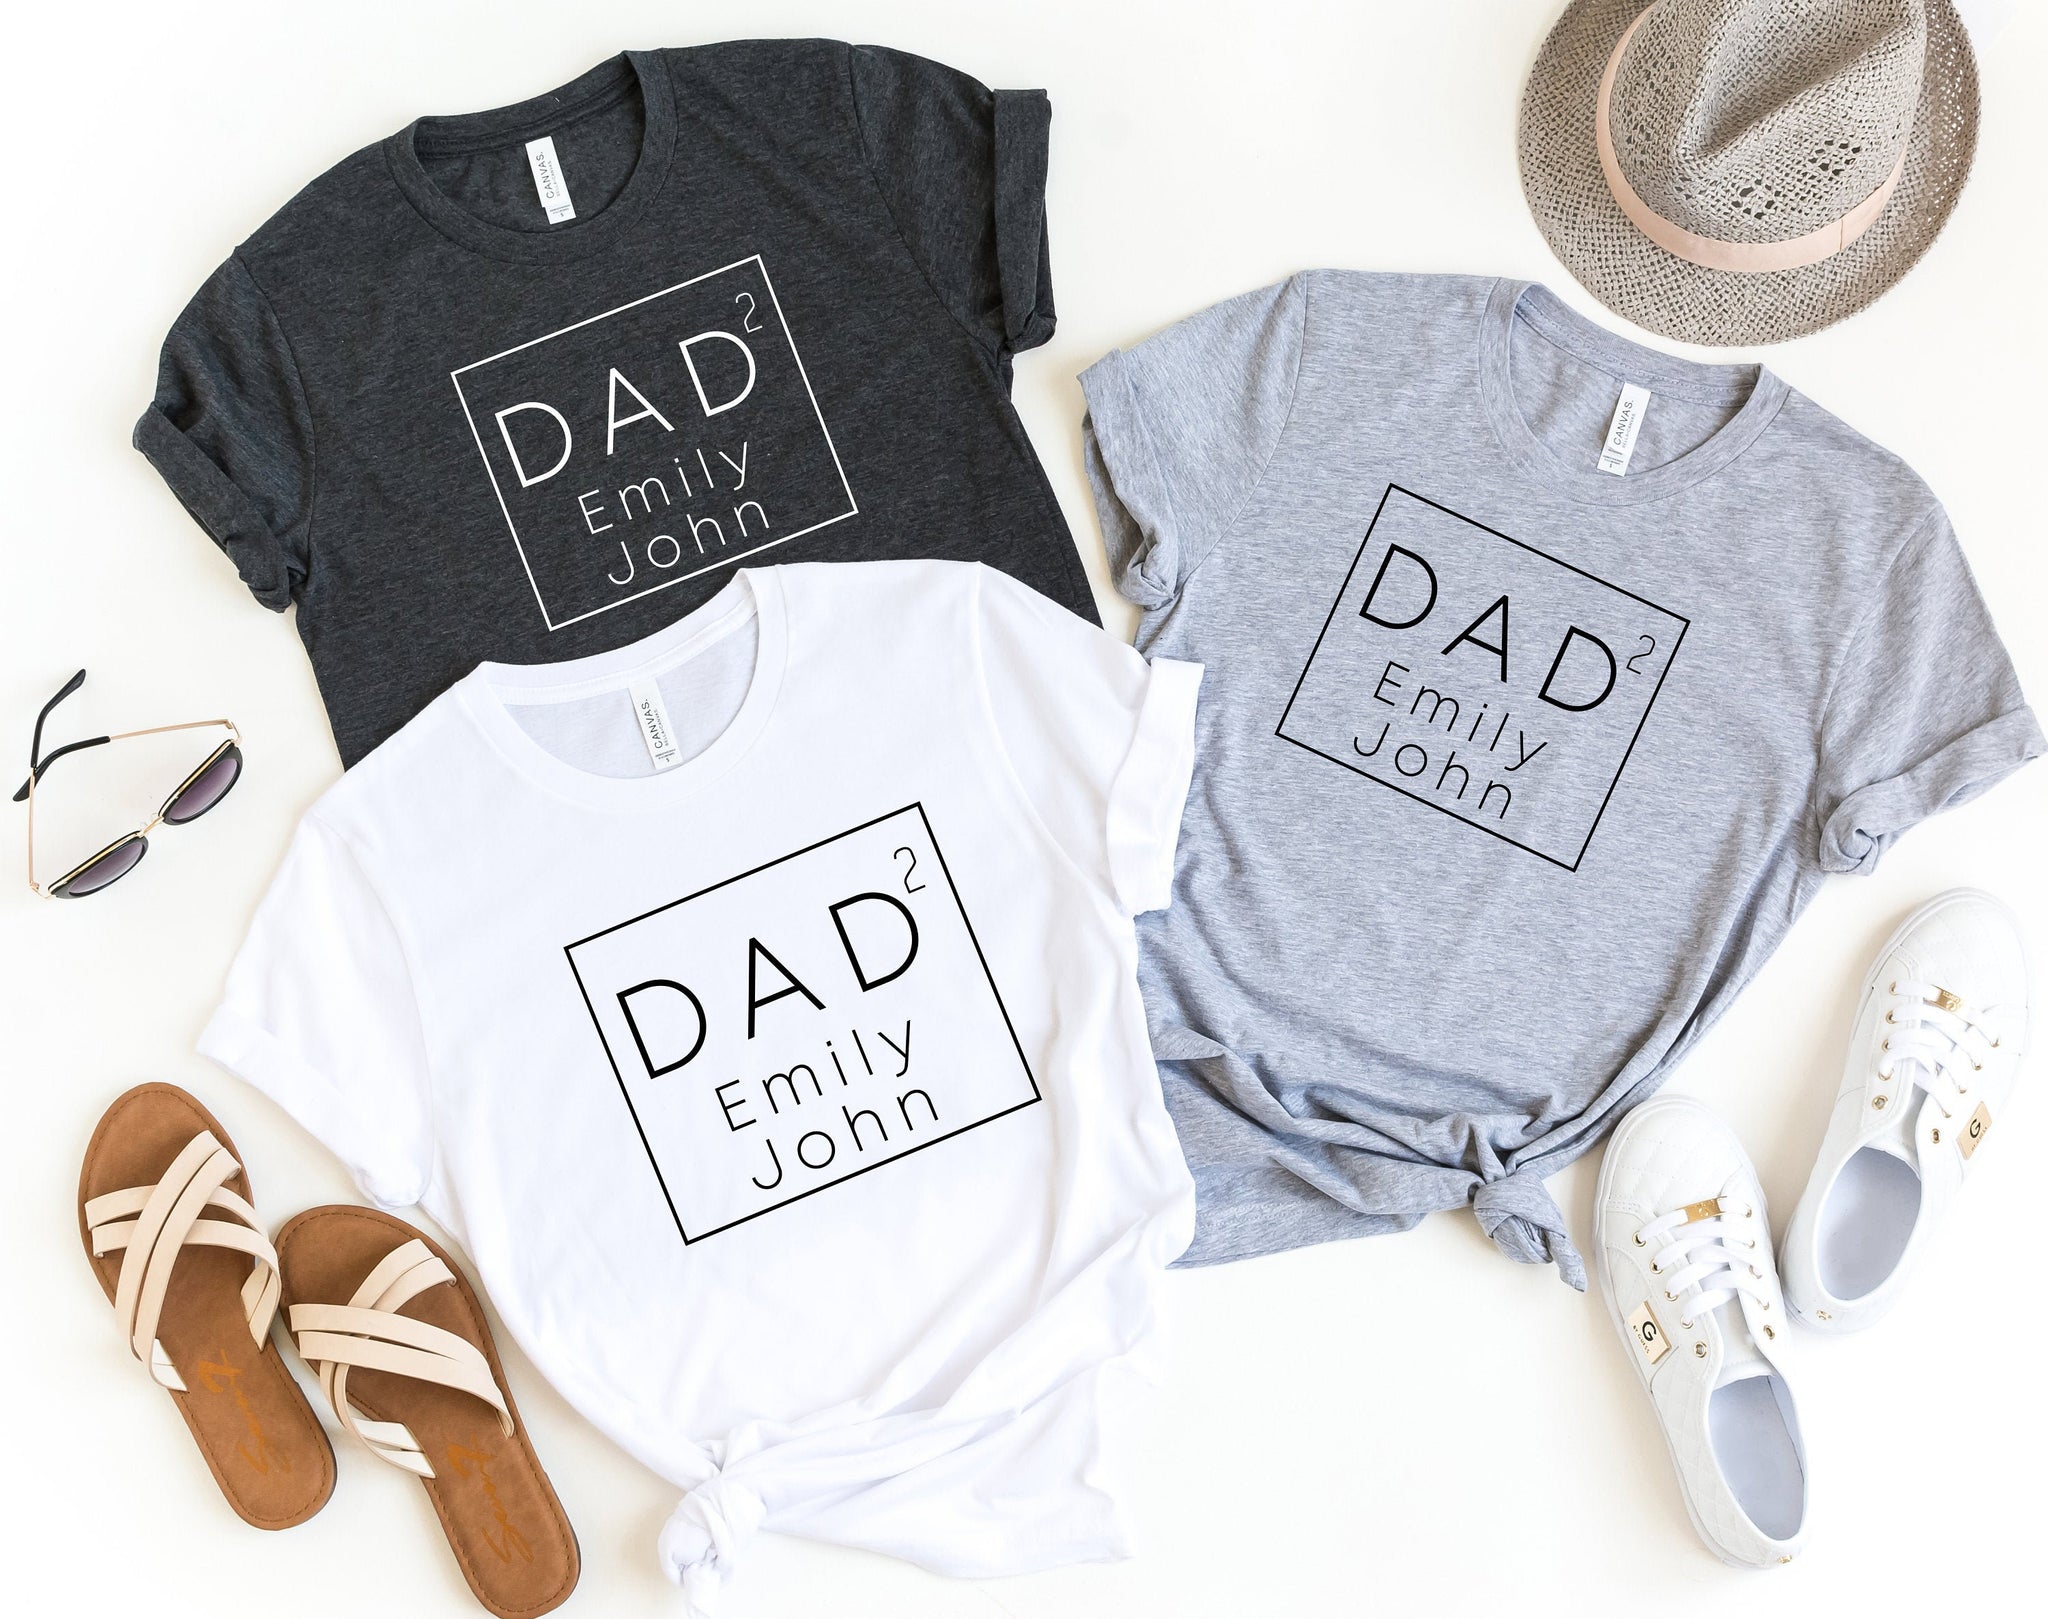 Personalized Dad Shirt for Fathers Day, Personalized Dad gift, Custom Dad Shirt, Funny Shirts for dad, dad square, daughter,Dad Birthday,d98 - Fastdeliverytees.com